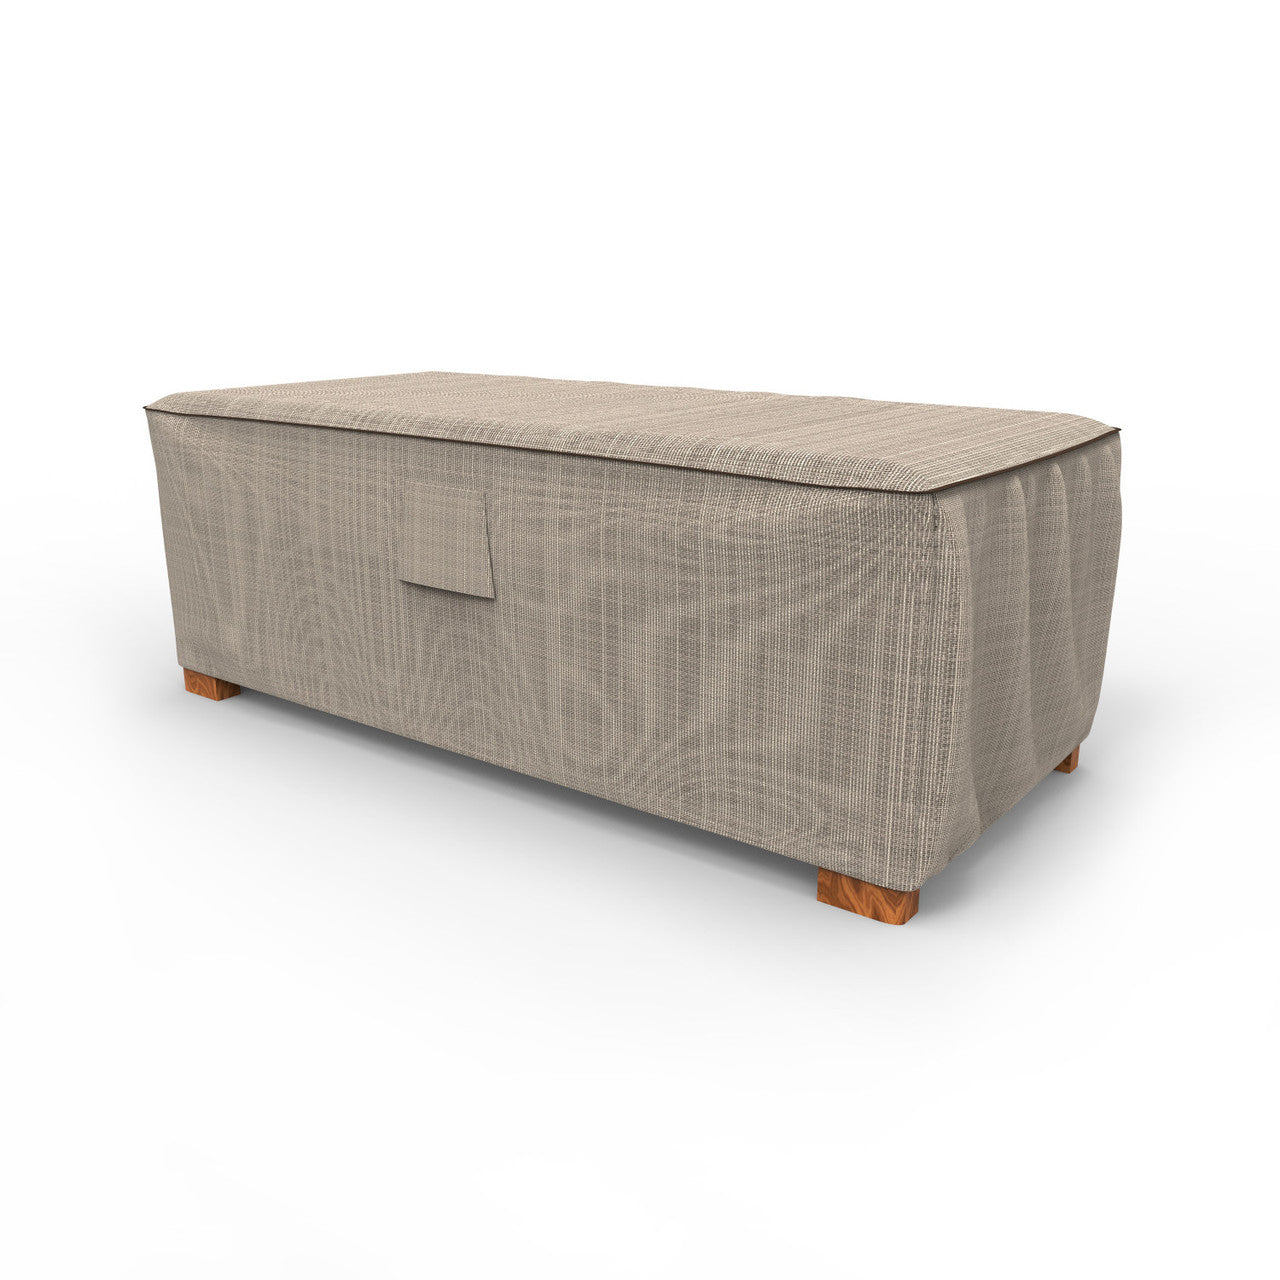 Budge Industries English Garden Slim Patio Ottoman/Coffee Table Cover - Large